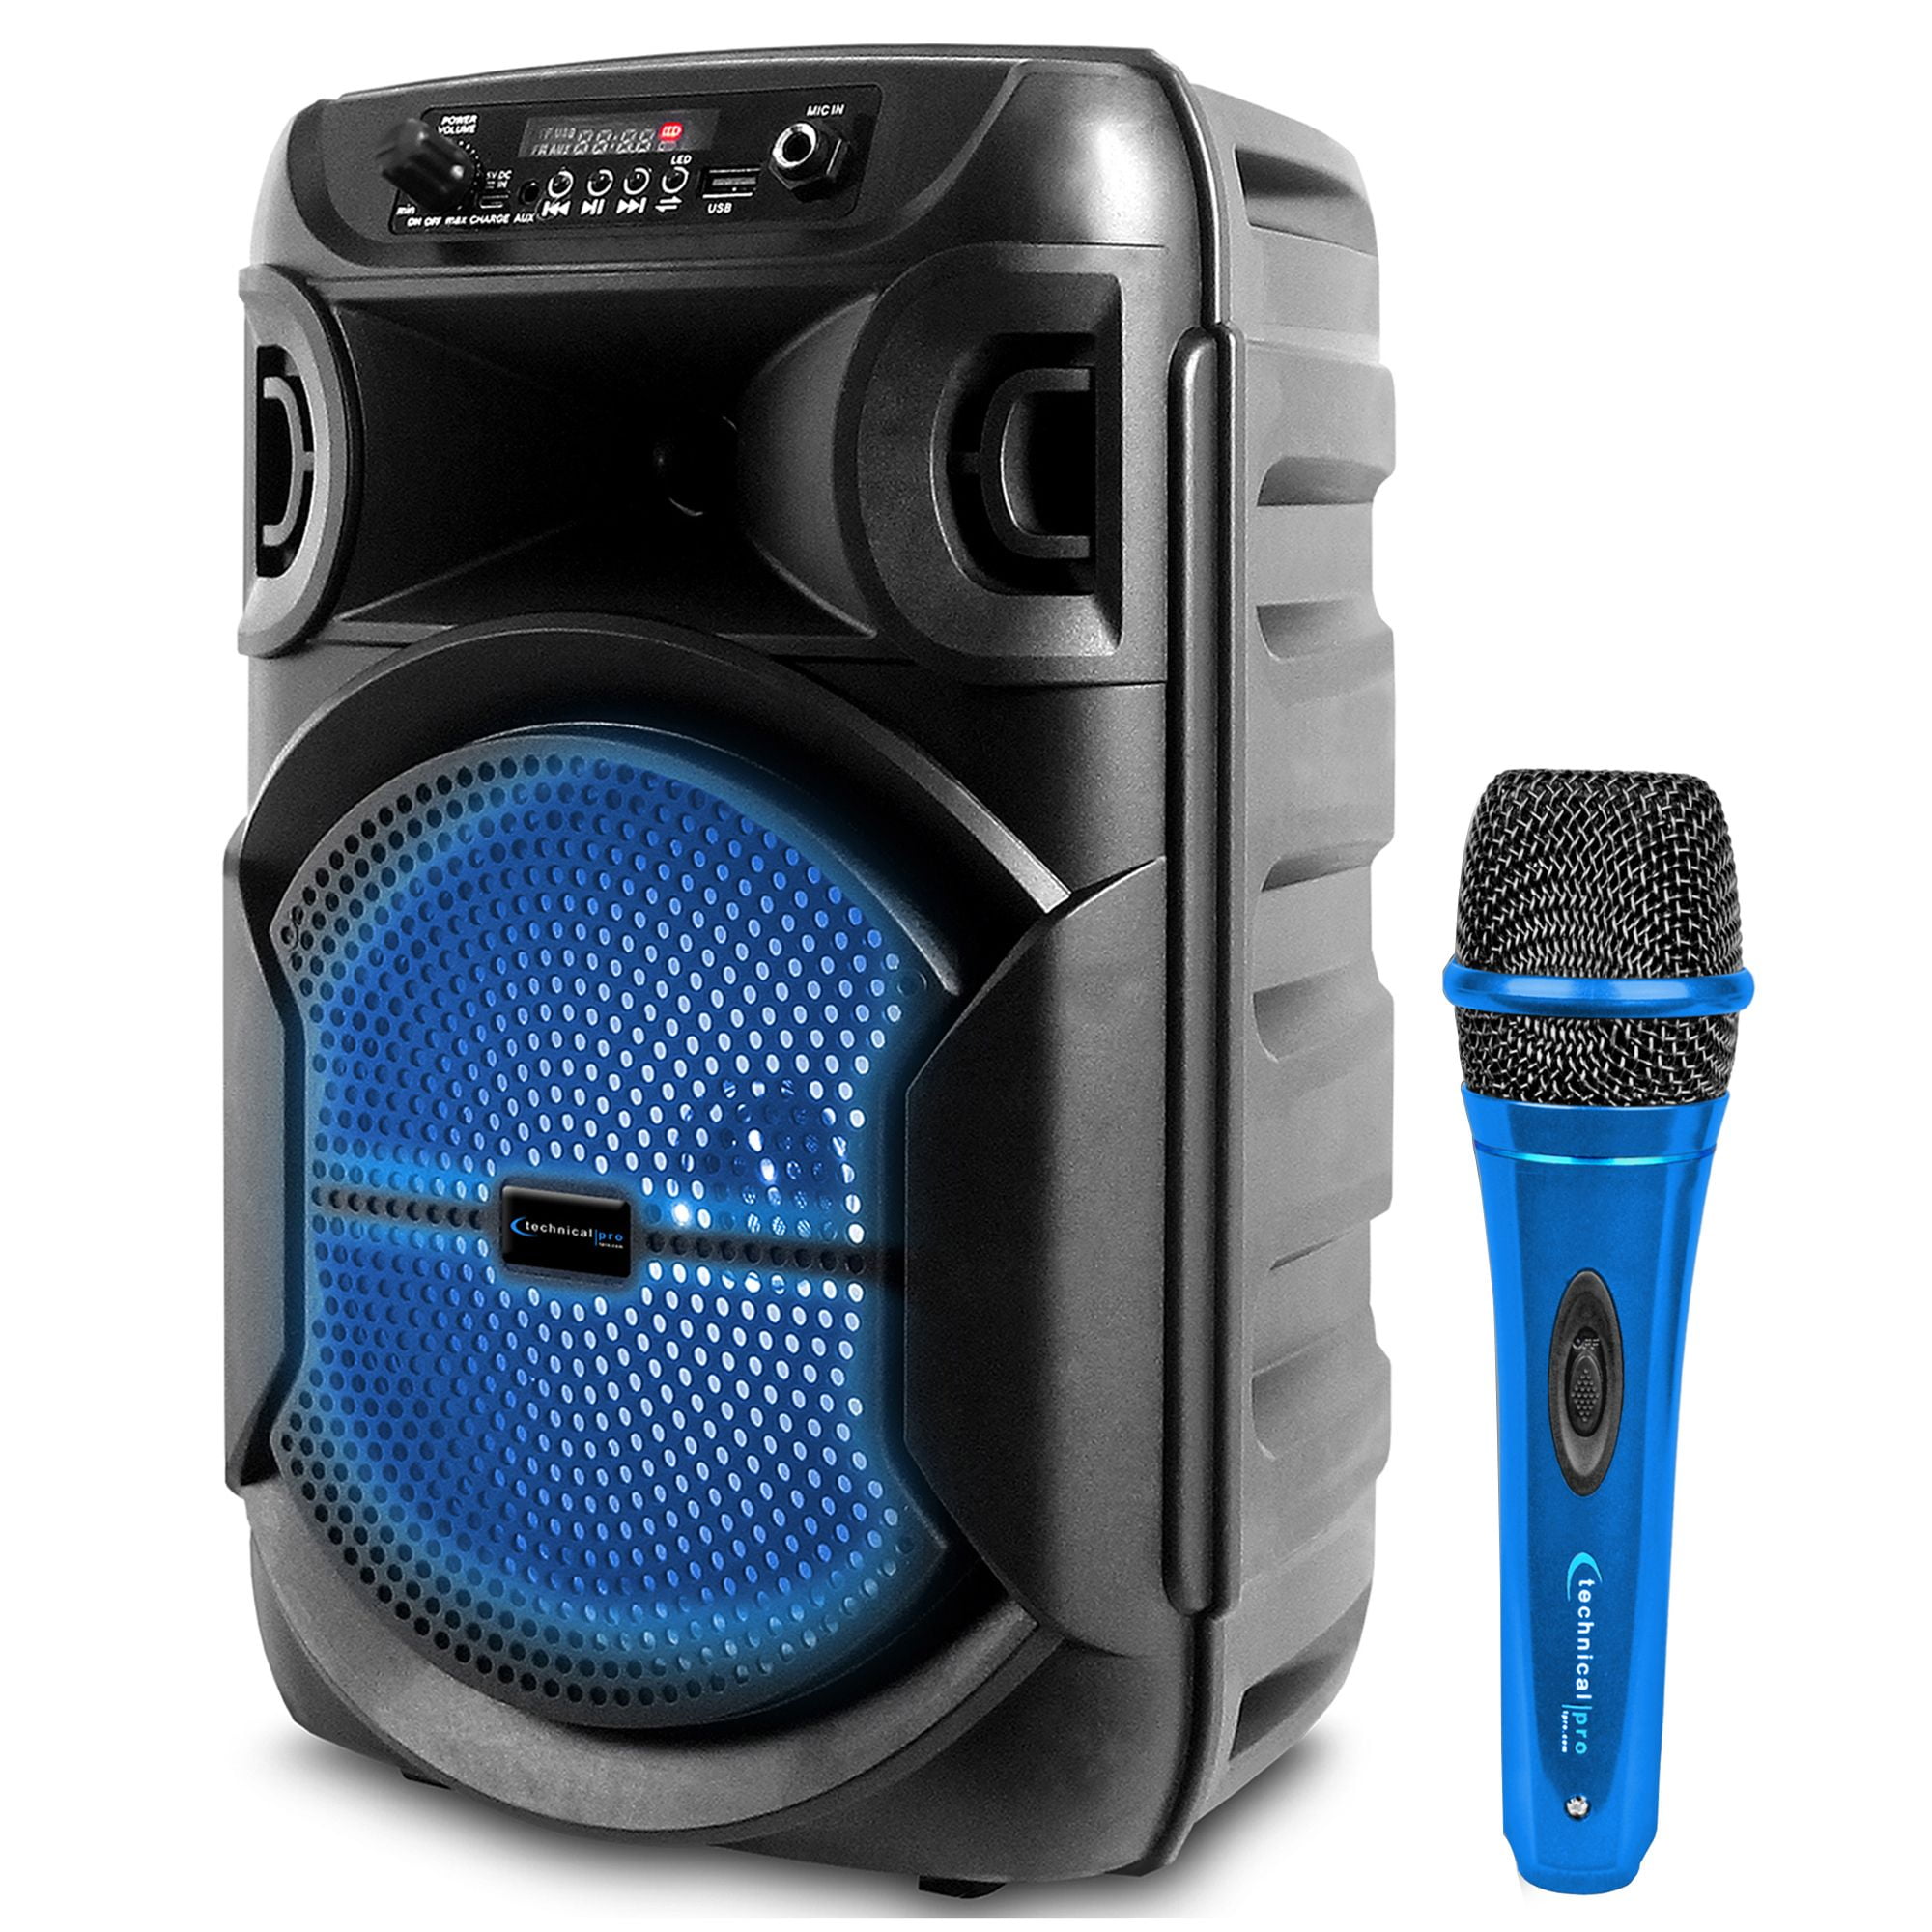 Wireless microphone with speaker